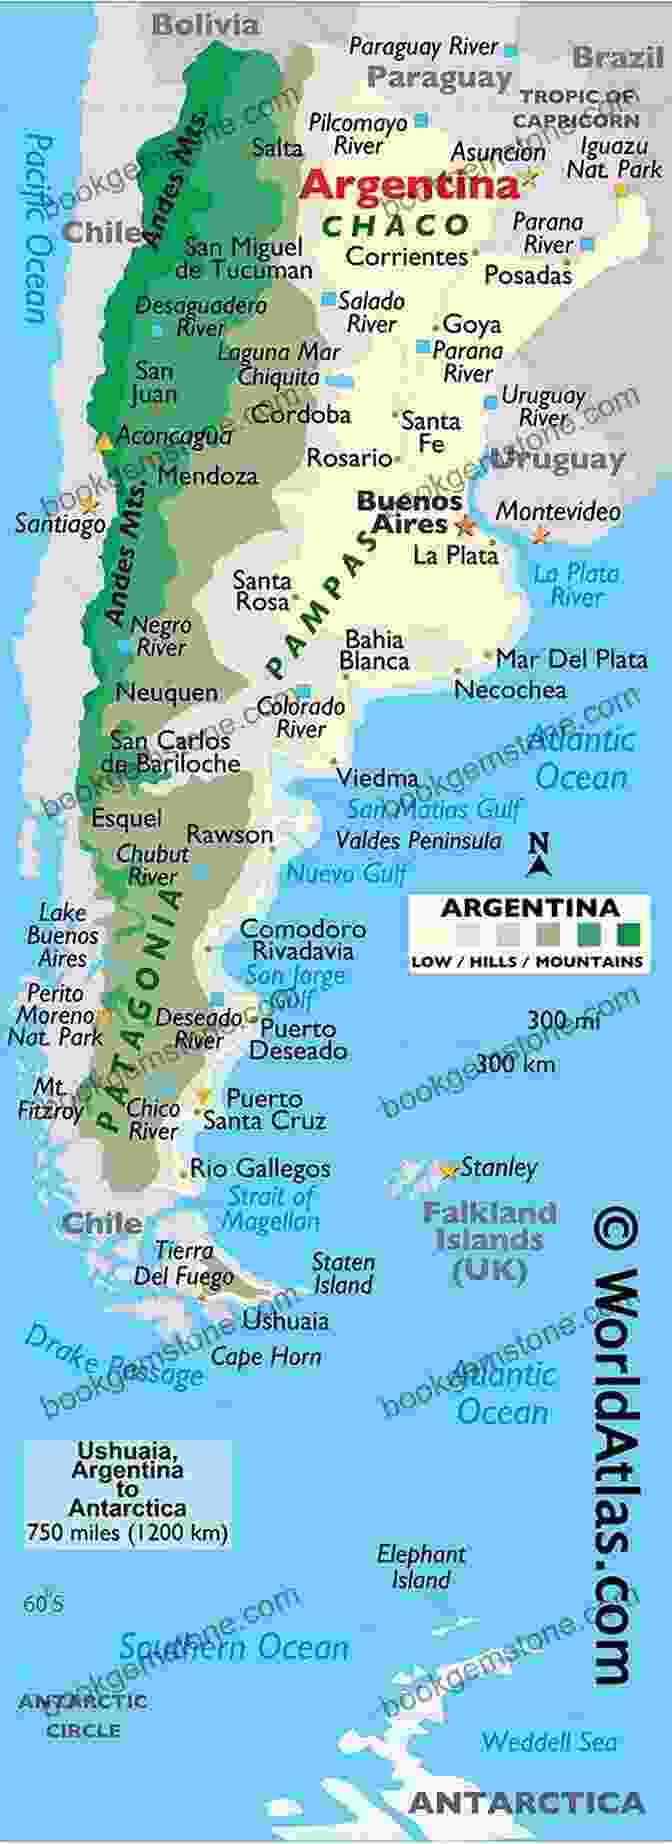 A Detailed Map Of Argentina, Showing Major Cities, Natural Landmarks, And Travel Routes DK Eyewitness Argentina (Travel Guide)